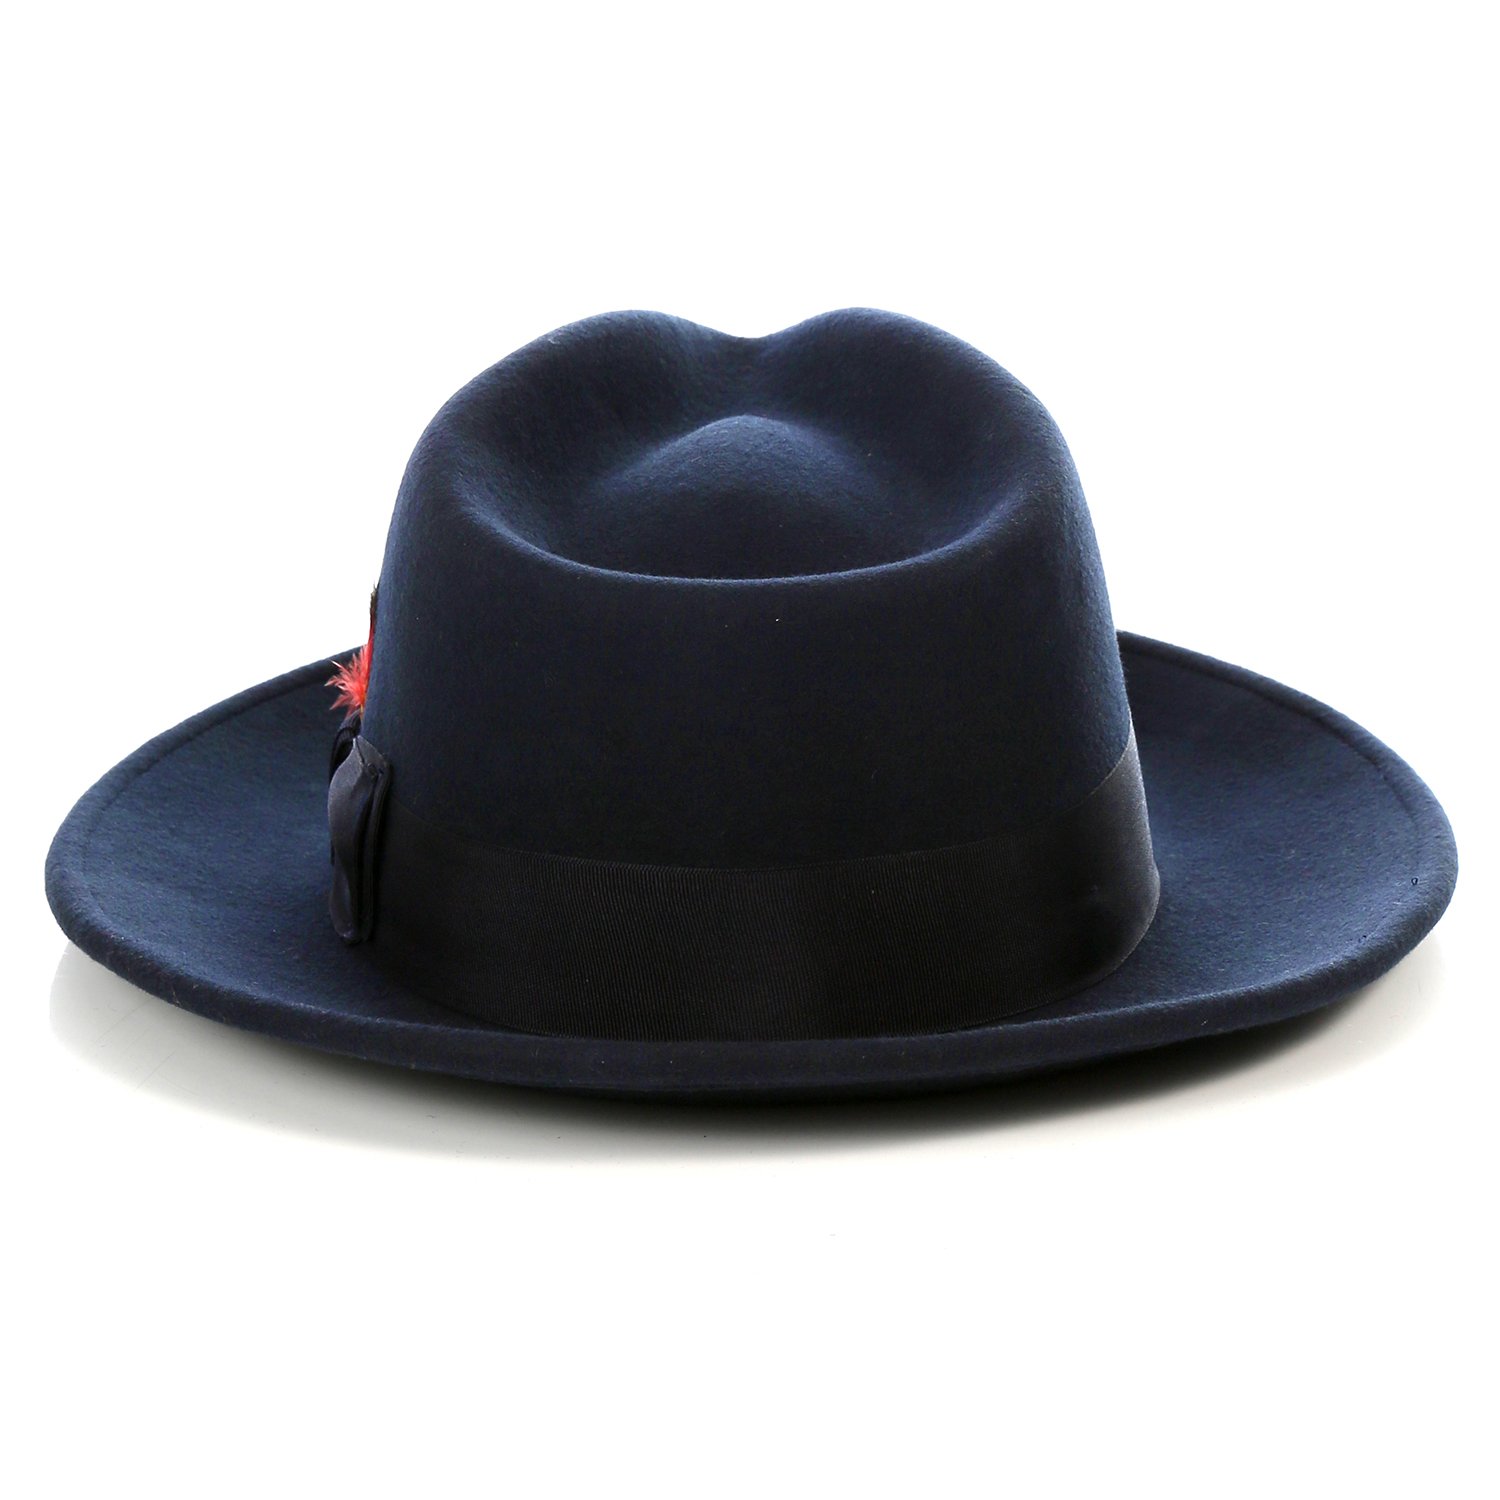 Ferrecci Navy Wool Crushable Fedora with Removable Feather - Unisex, Men’s, Women’s Traveler Hat (X-Large 61cm-7 5/8) - image 3 of 4